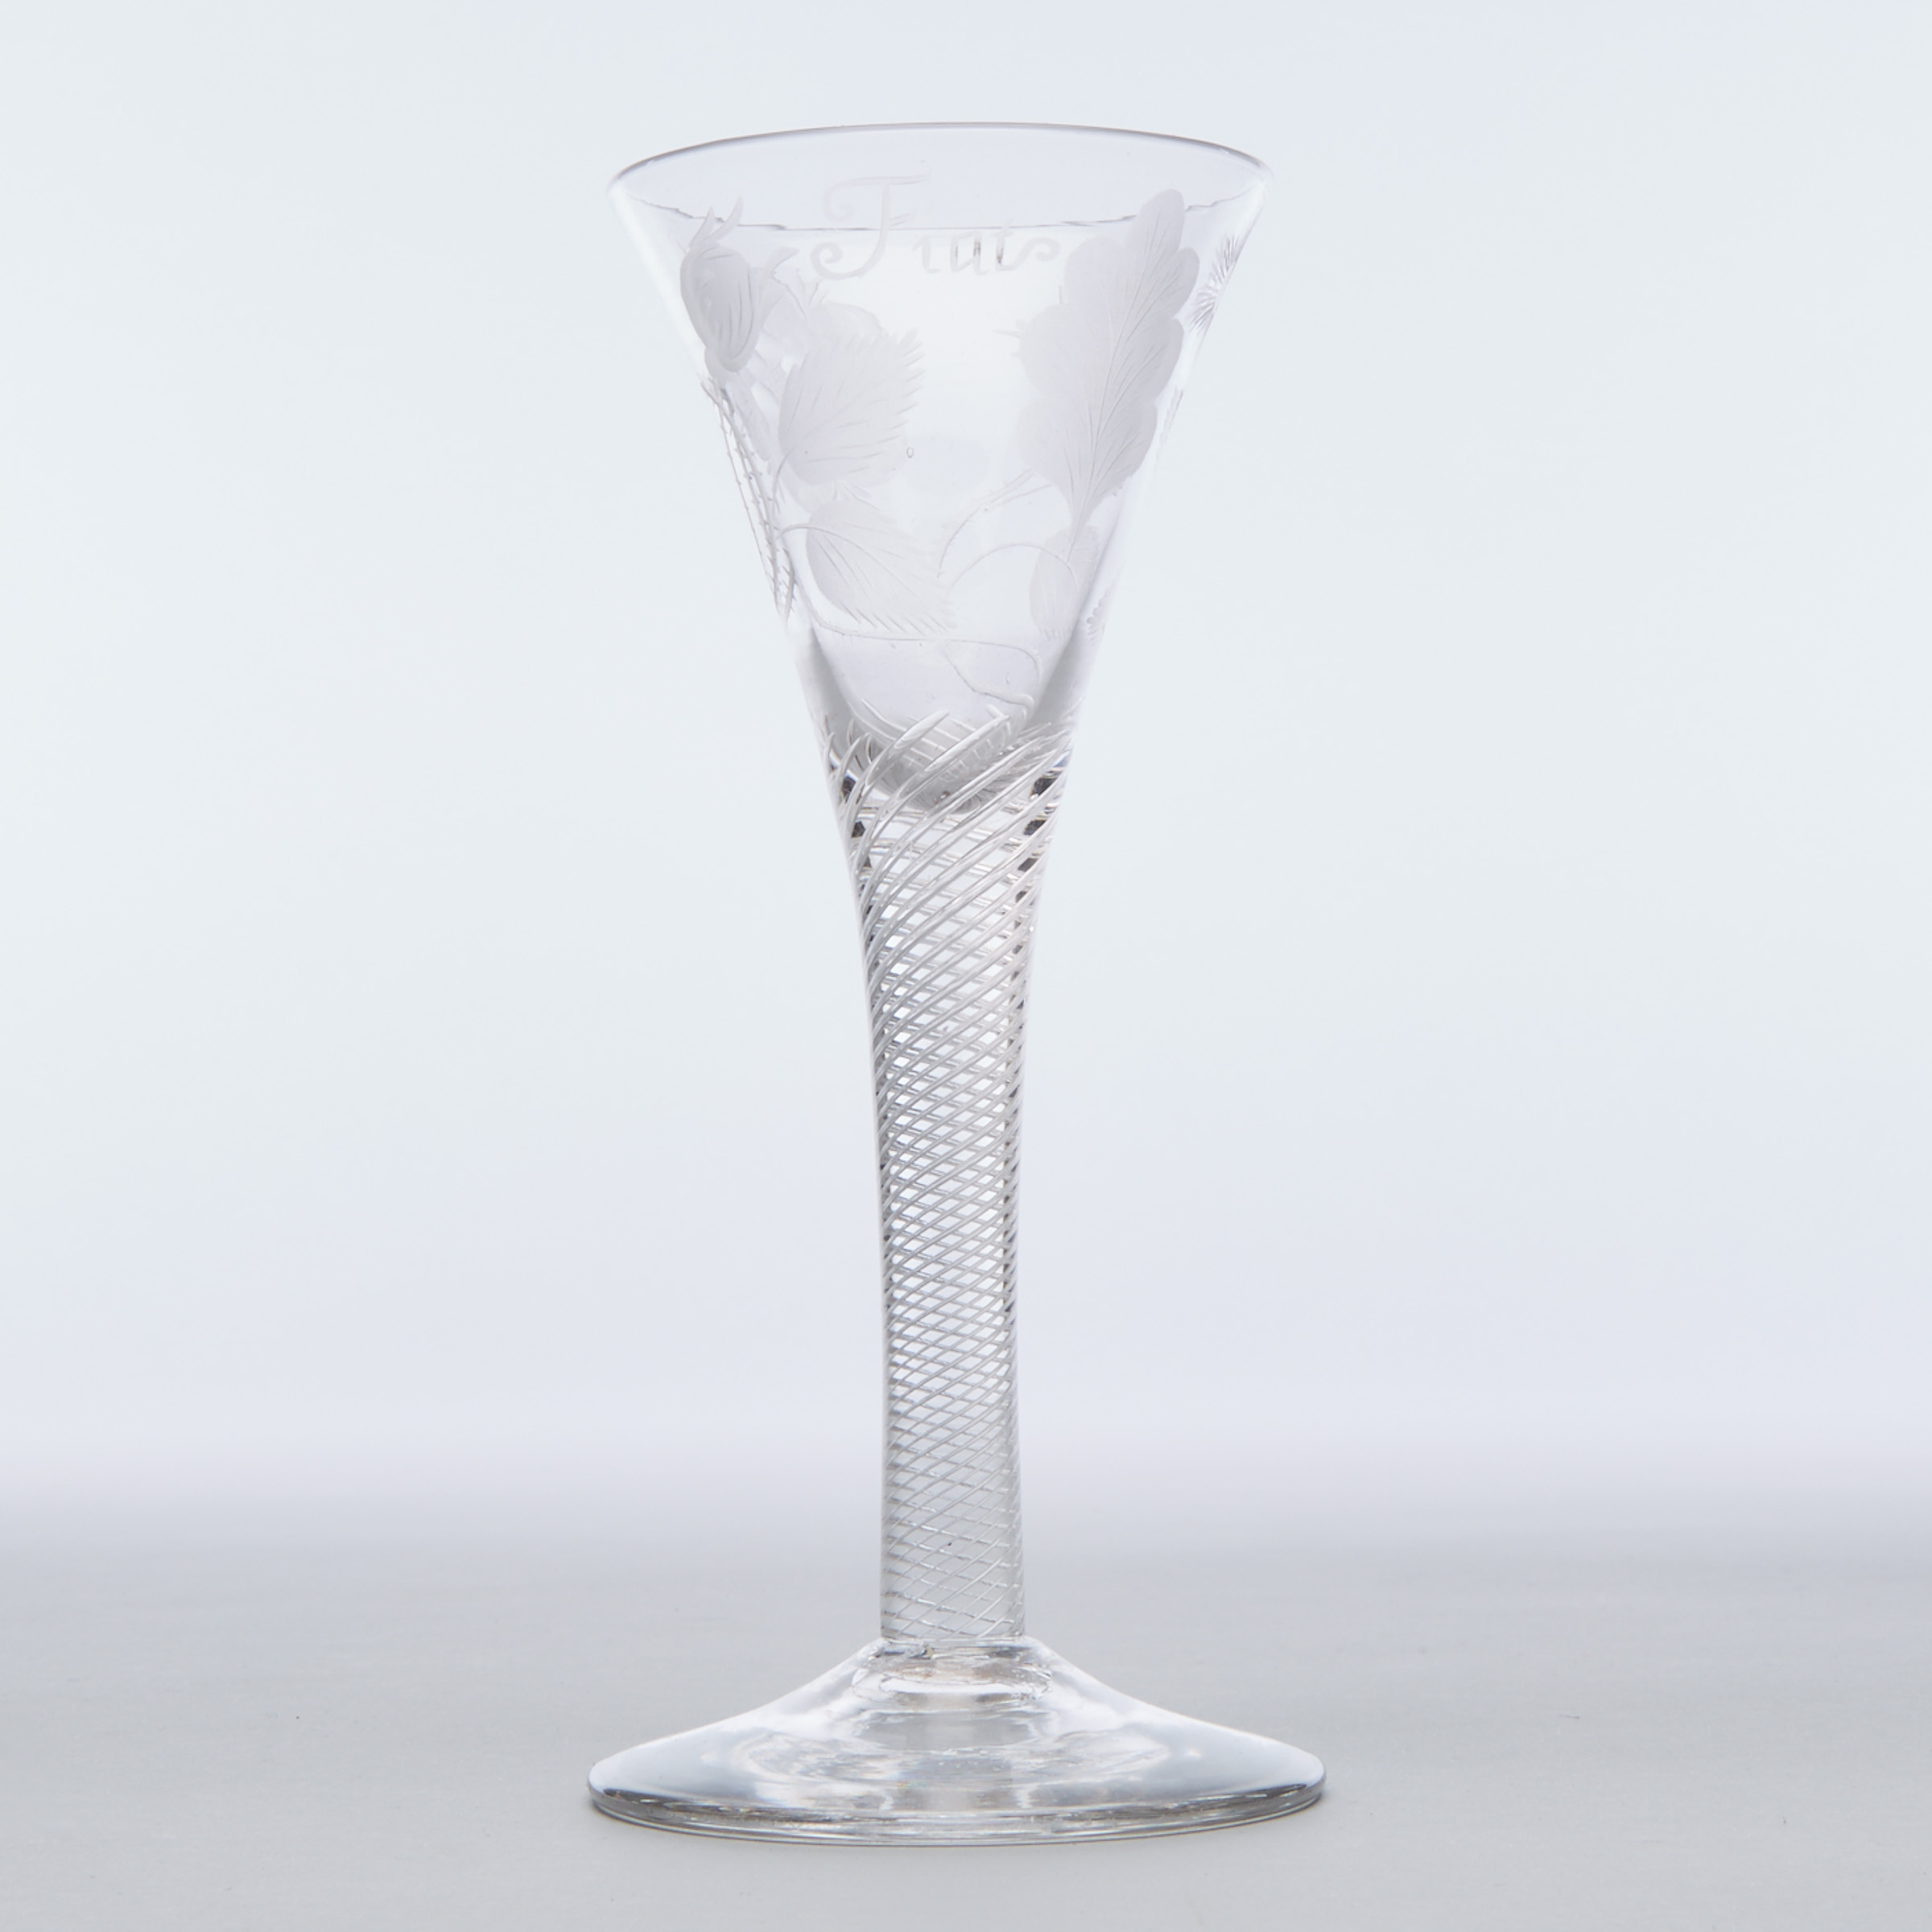 Jacobite Engraved Airtwist Stemmed Wine Glass, c.1750